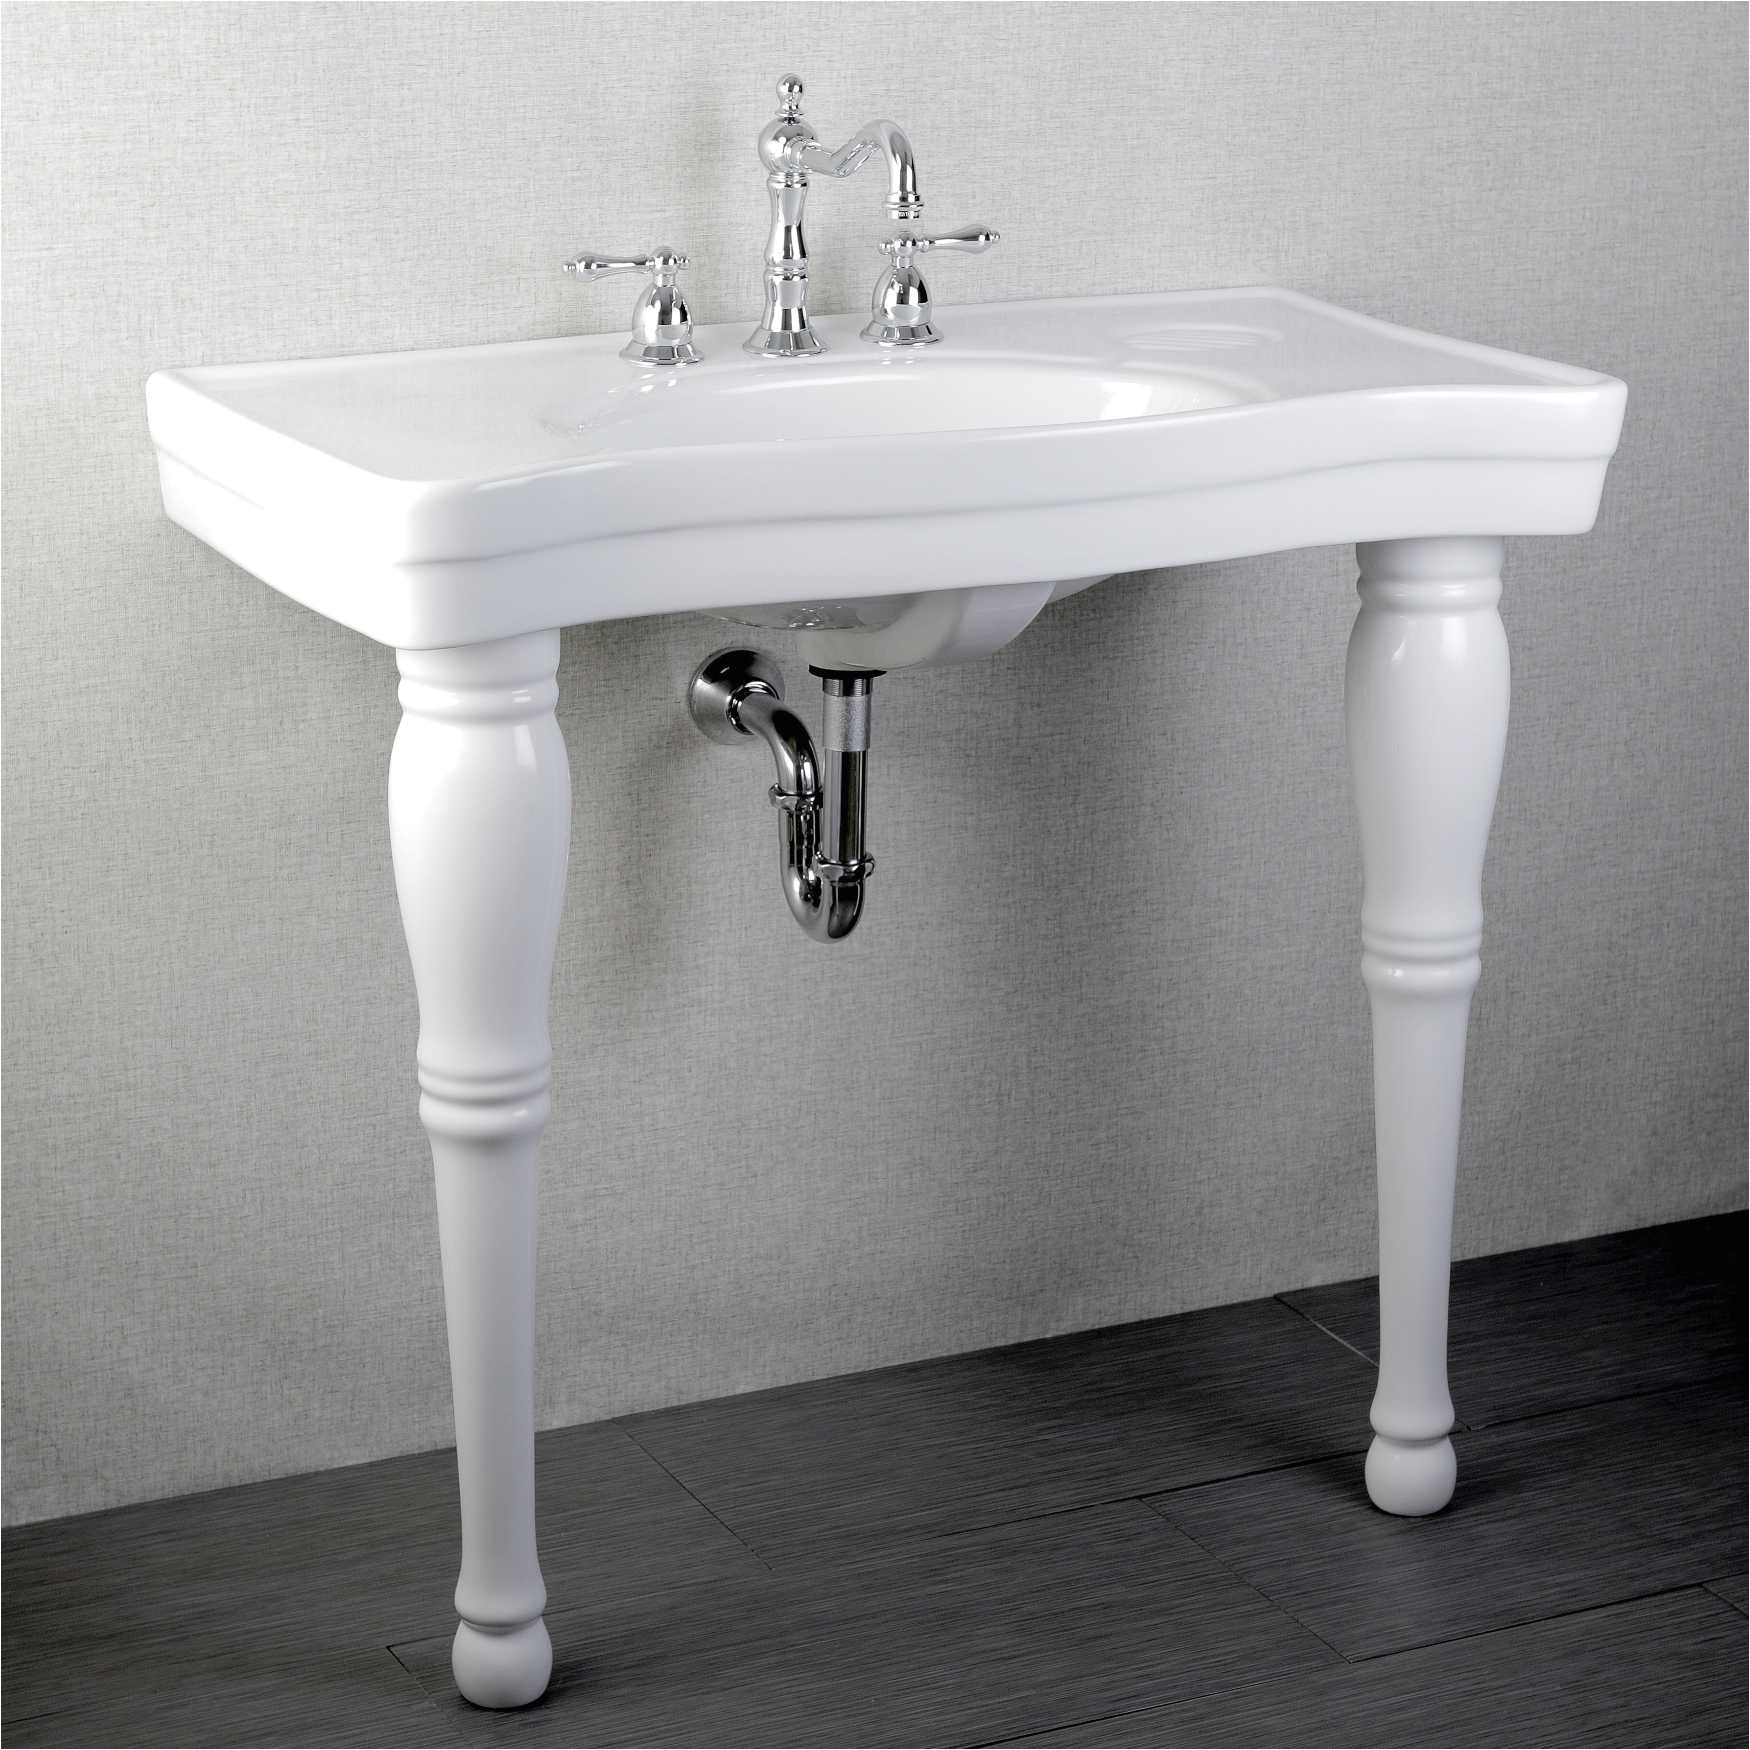 vintage style bathroom sinks inspirational ps lh sink vintage pedestal ps i 0d amazing with legs